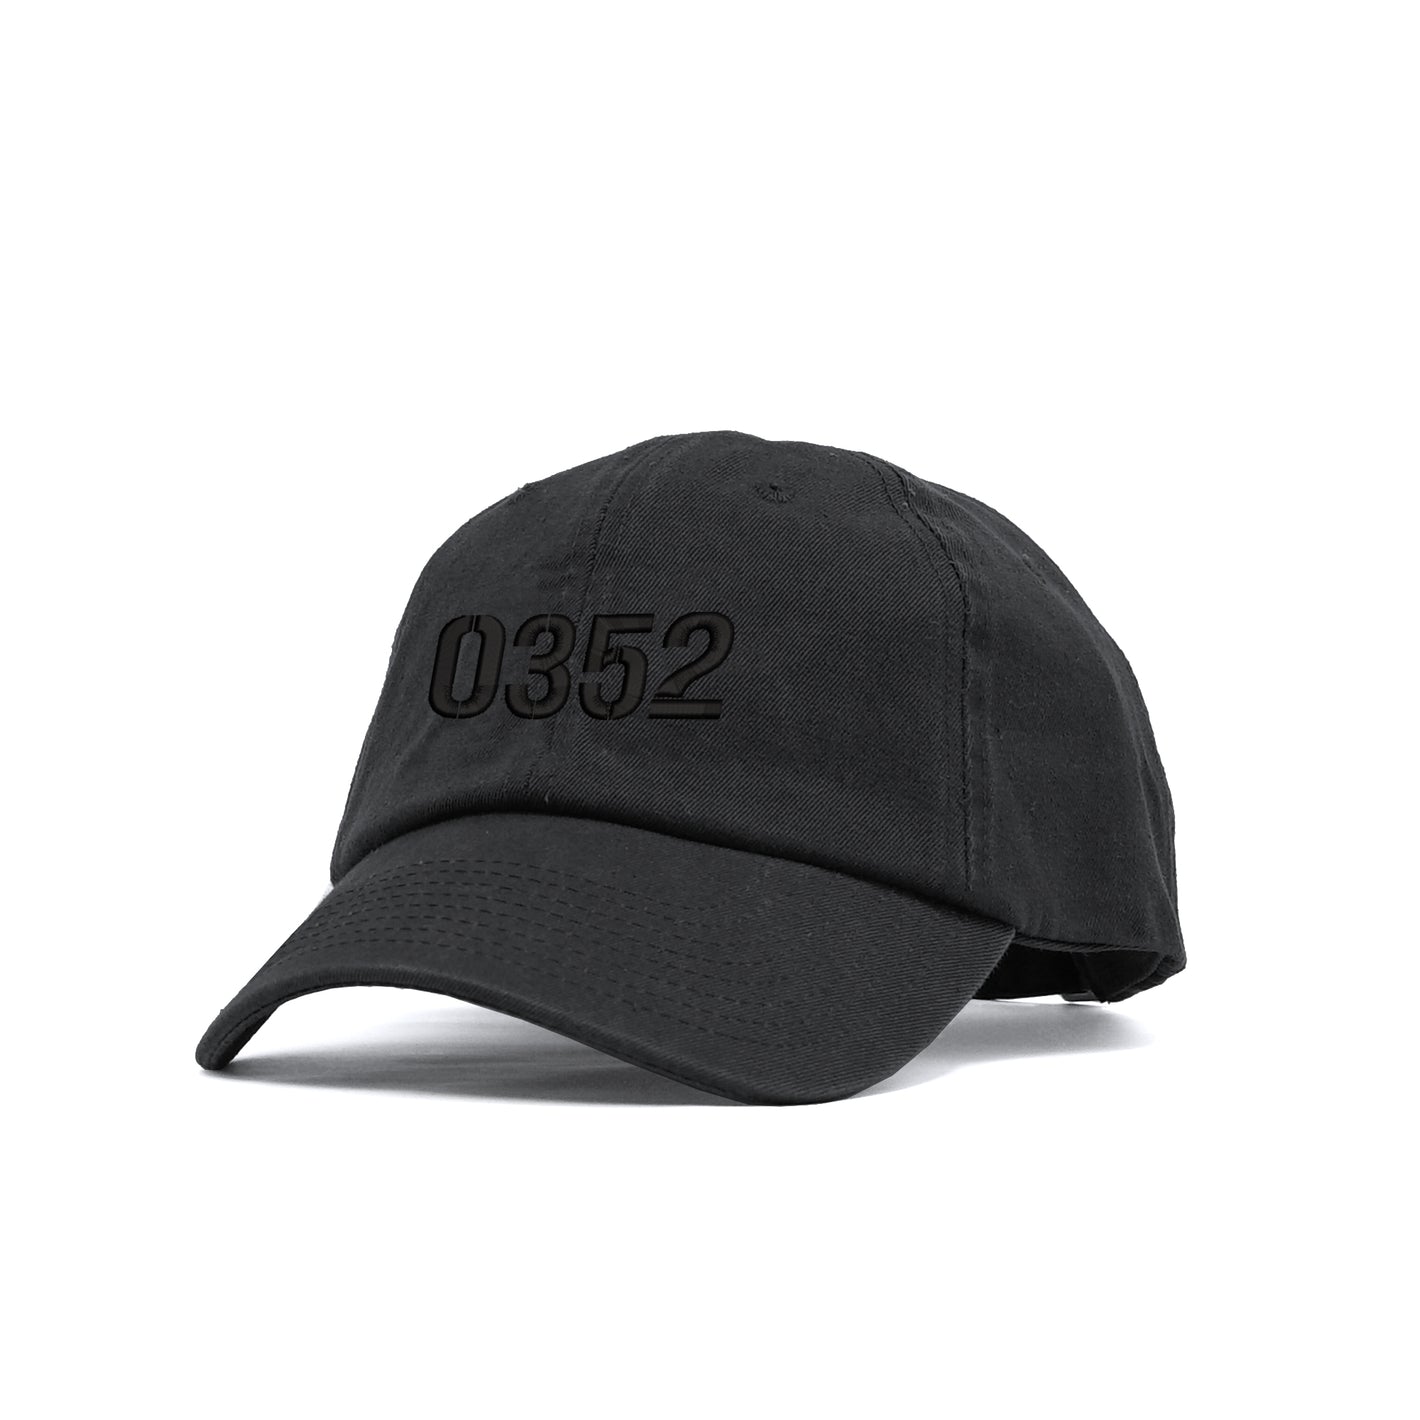 0352 Blackout Unstructured Hat with 3D embroidery- Black Hat w/ Black